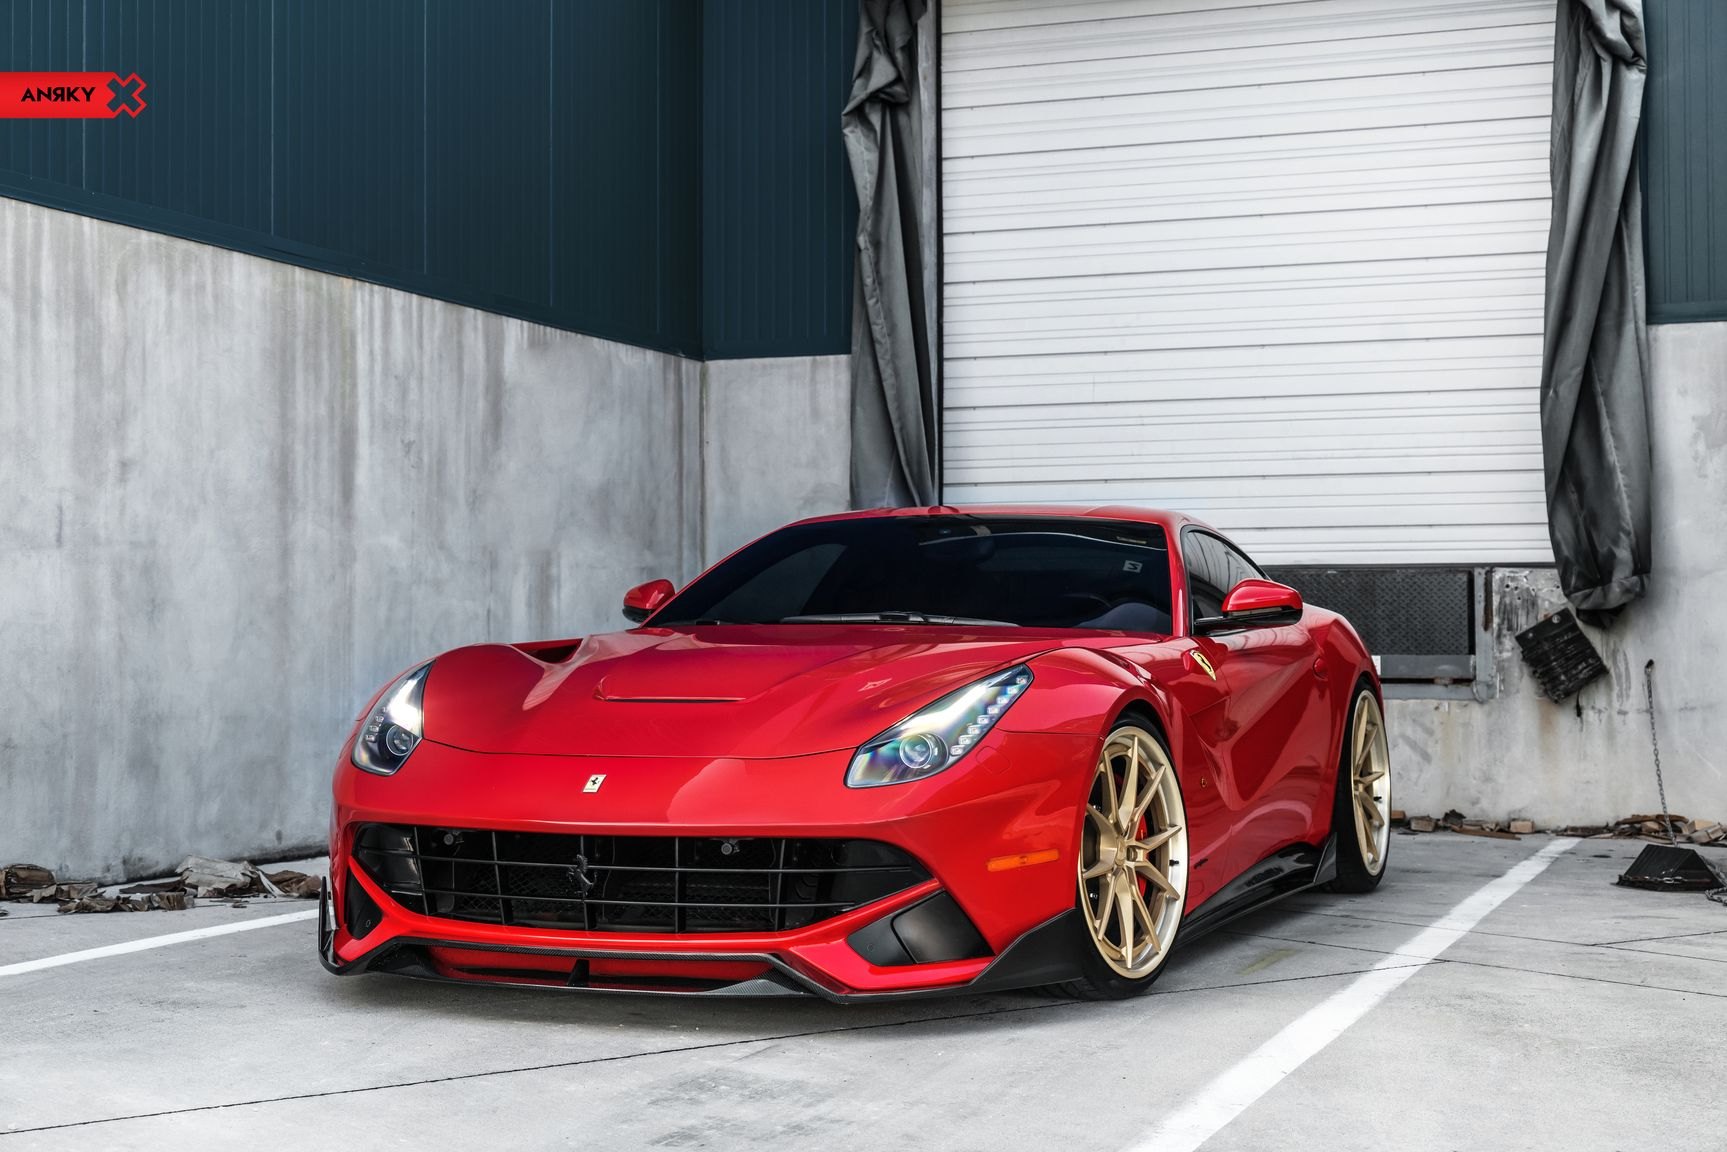 Red Ferrari F12 with Carbon Fiber Front Lip - Photo by Anrky Wheels